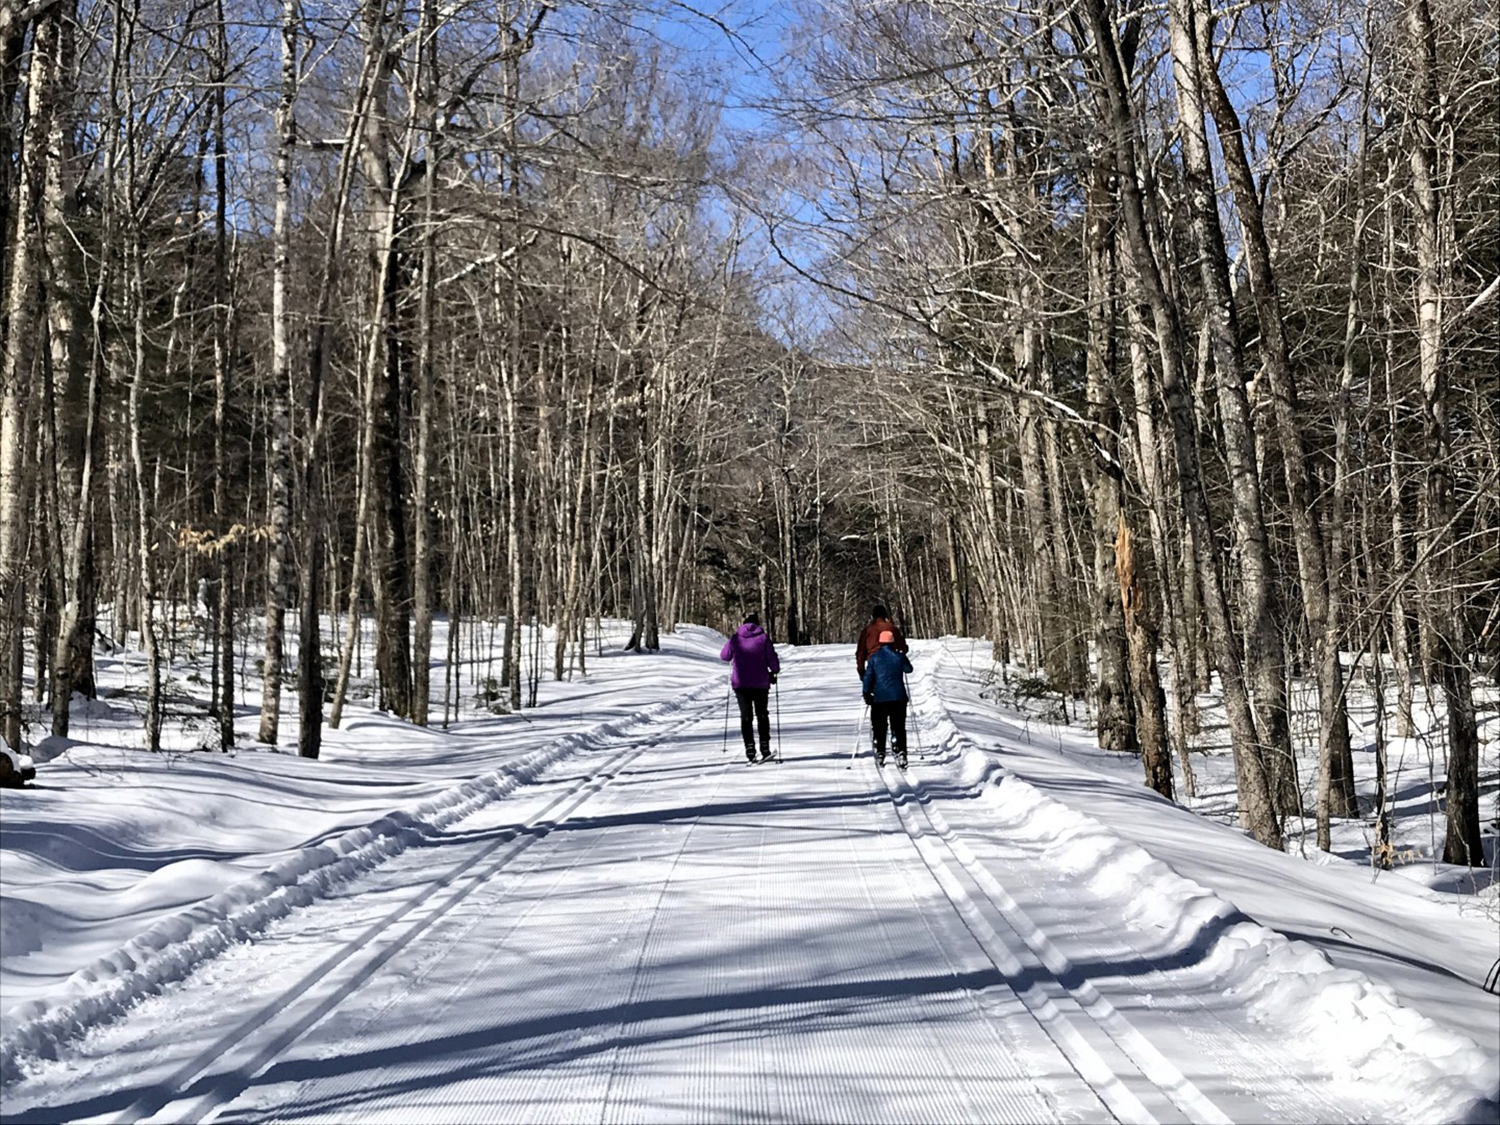 Hiking: Whether by ski or snowshoe, there's a gem just over